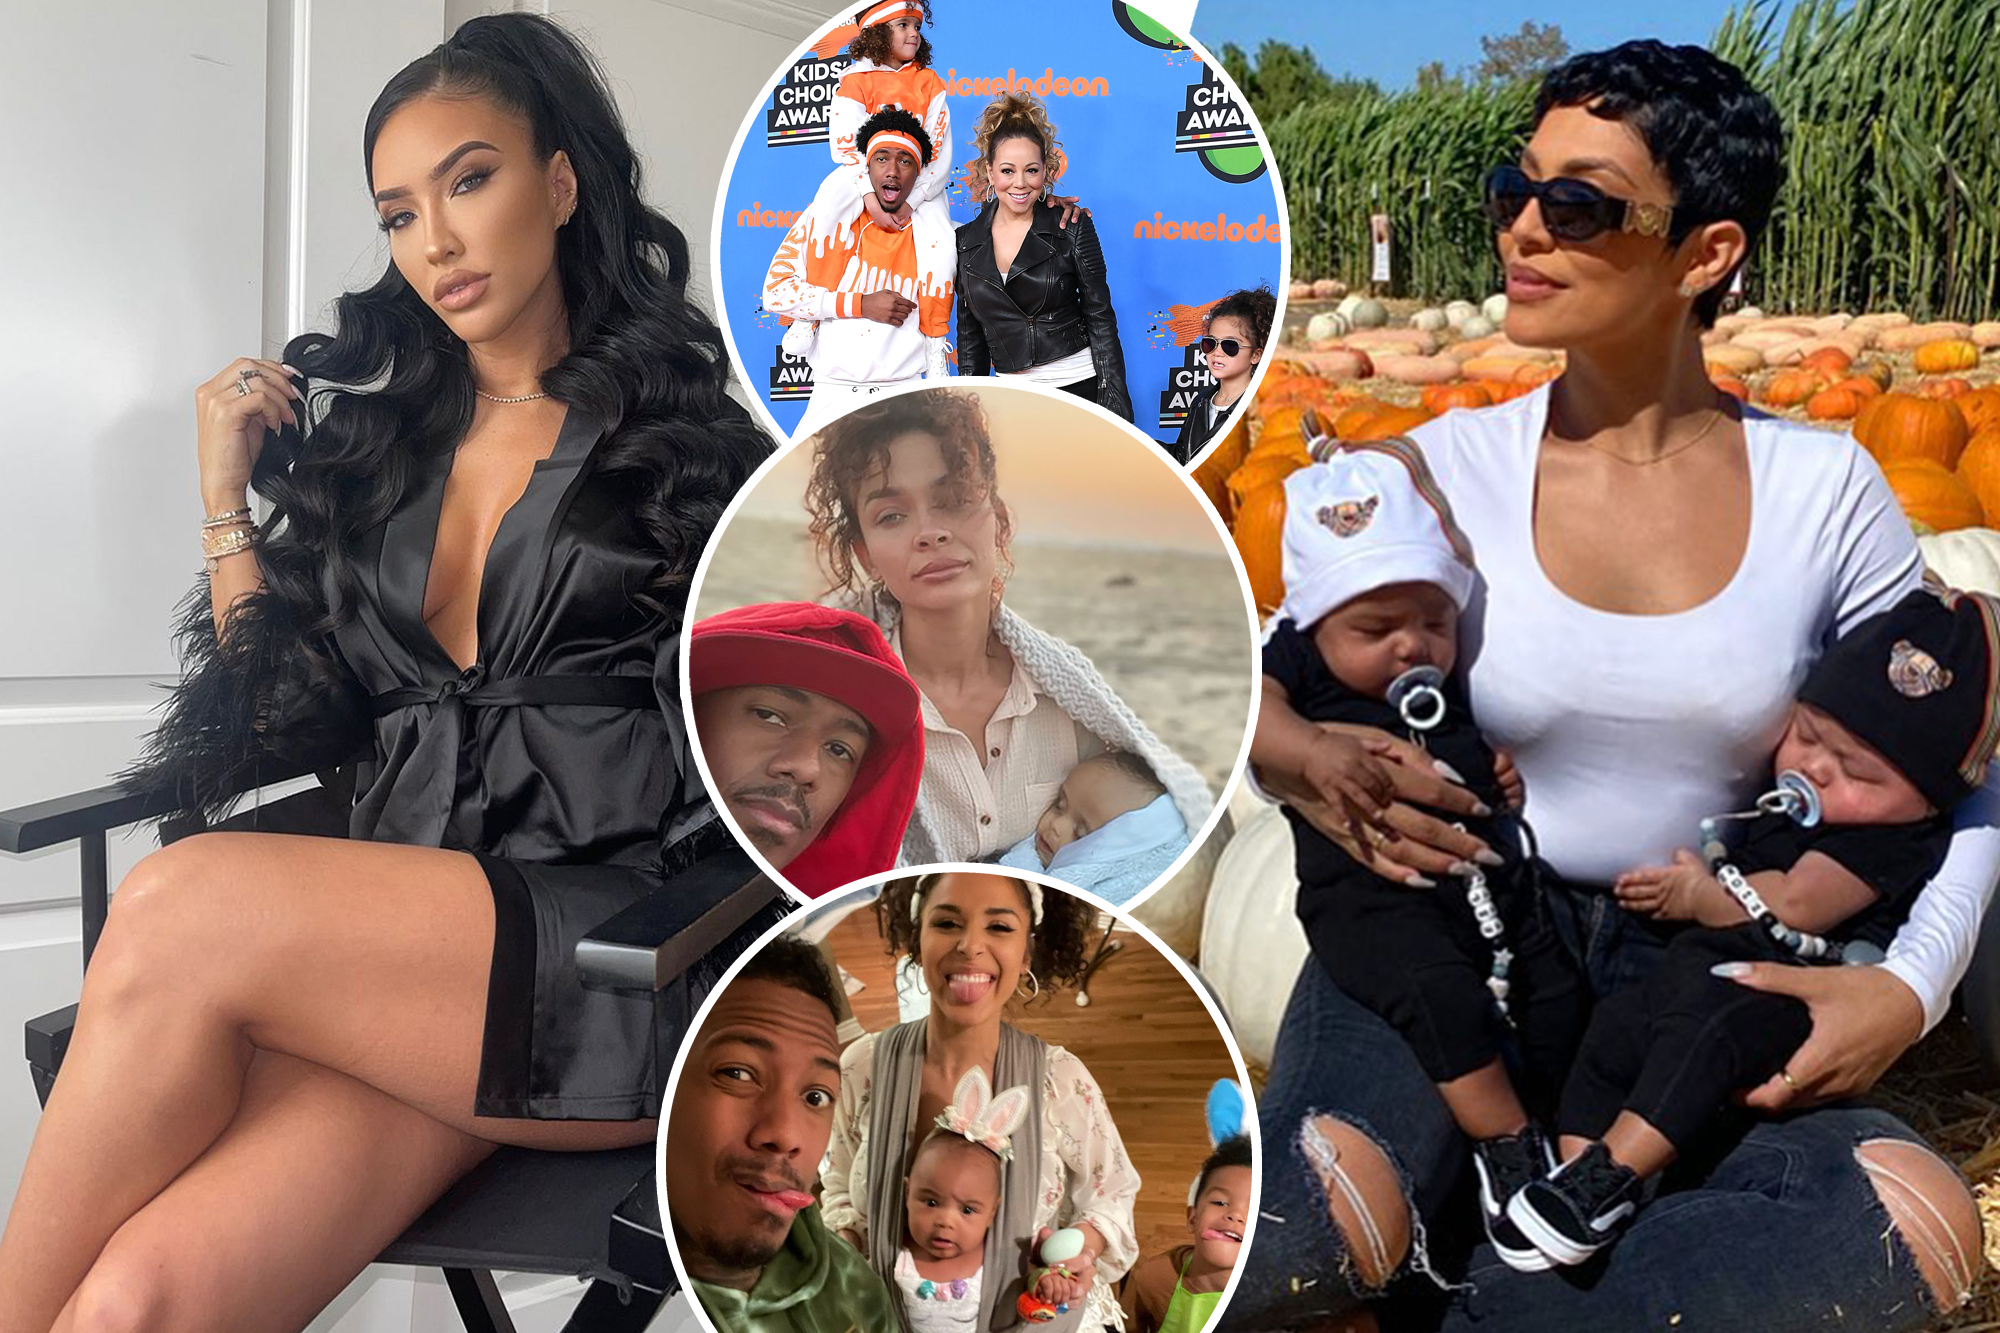 Nick Cannon Soon To Be Father Of 12 Has ‘No Idea’ If He Wants More